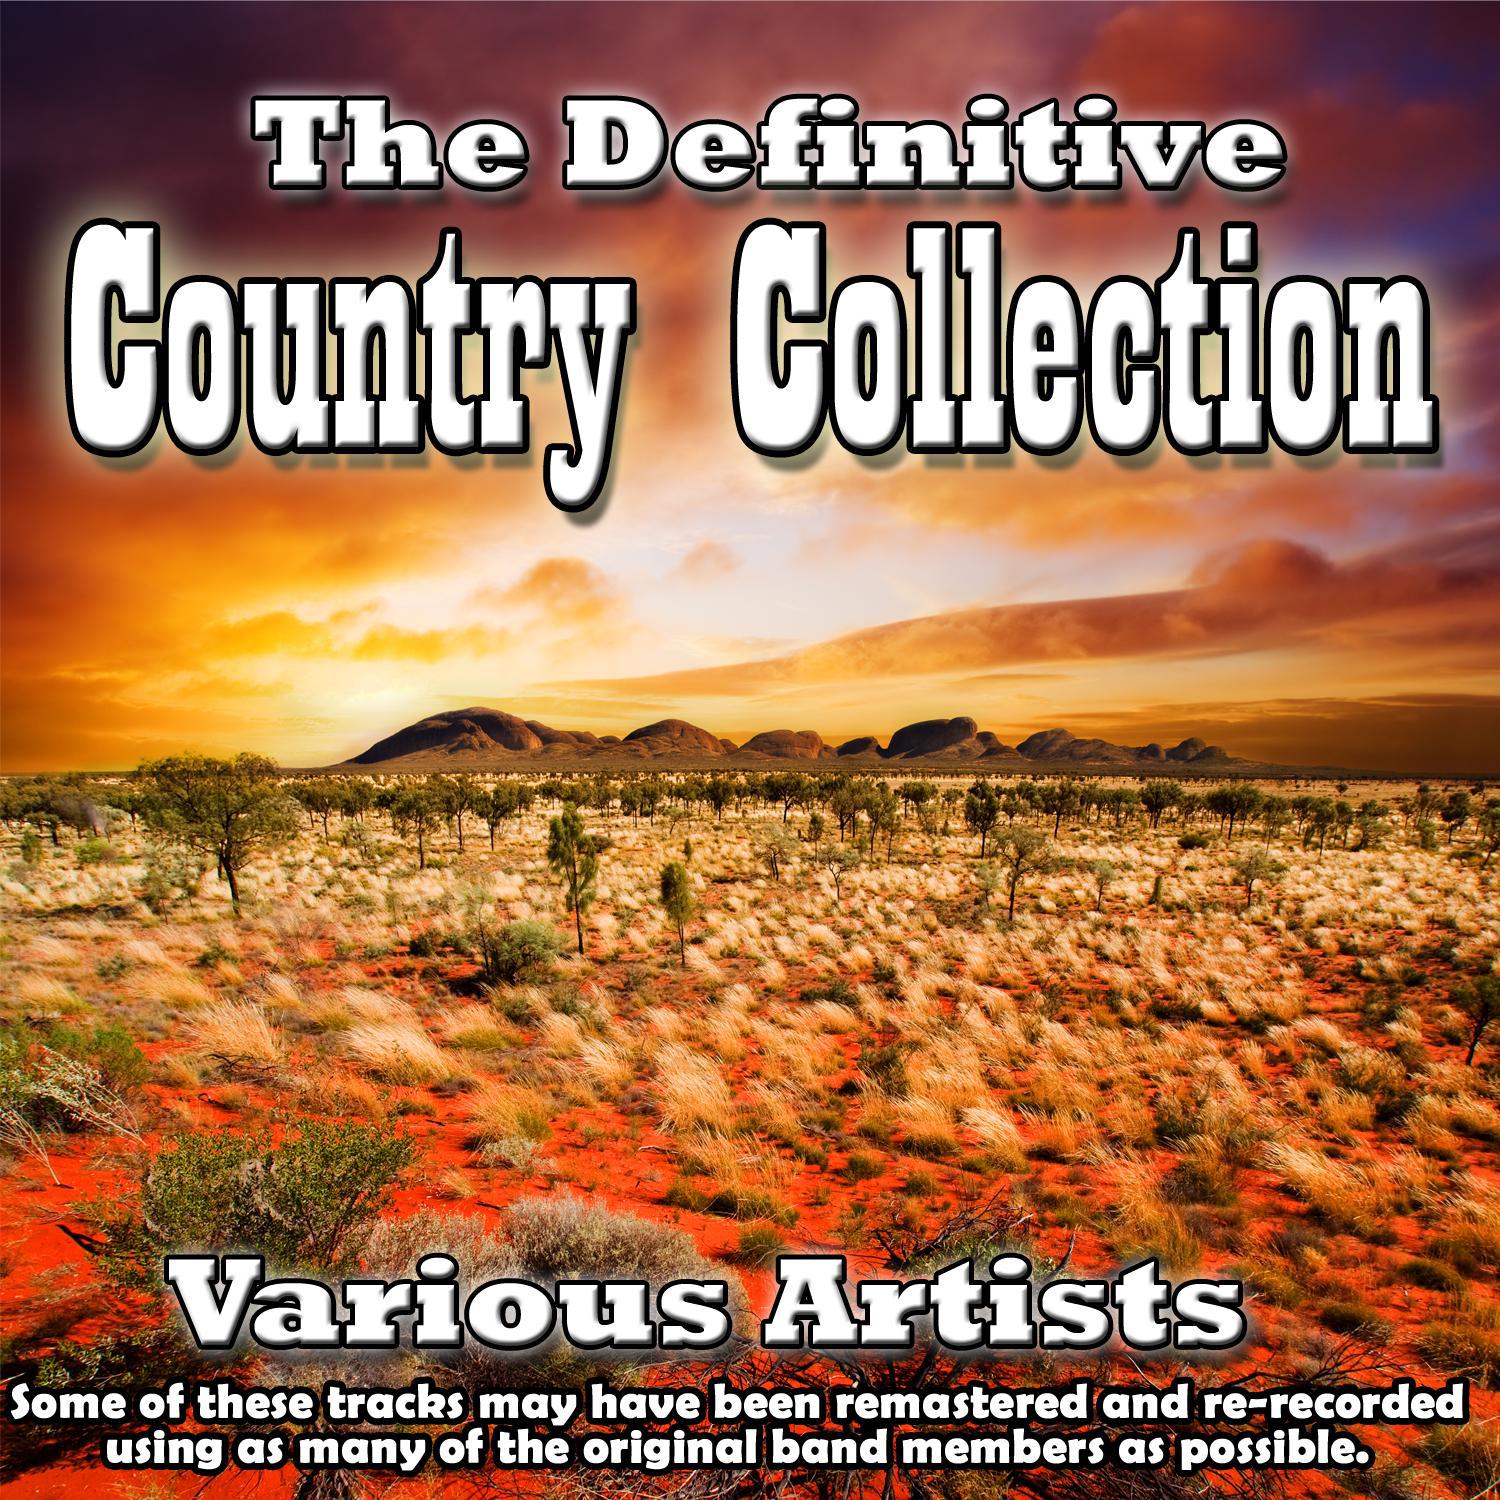 The Definitive Country Collection